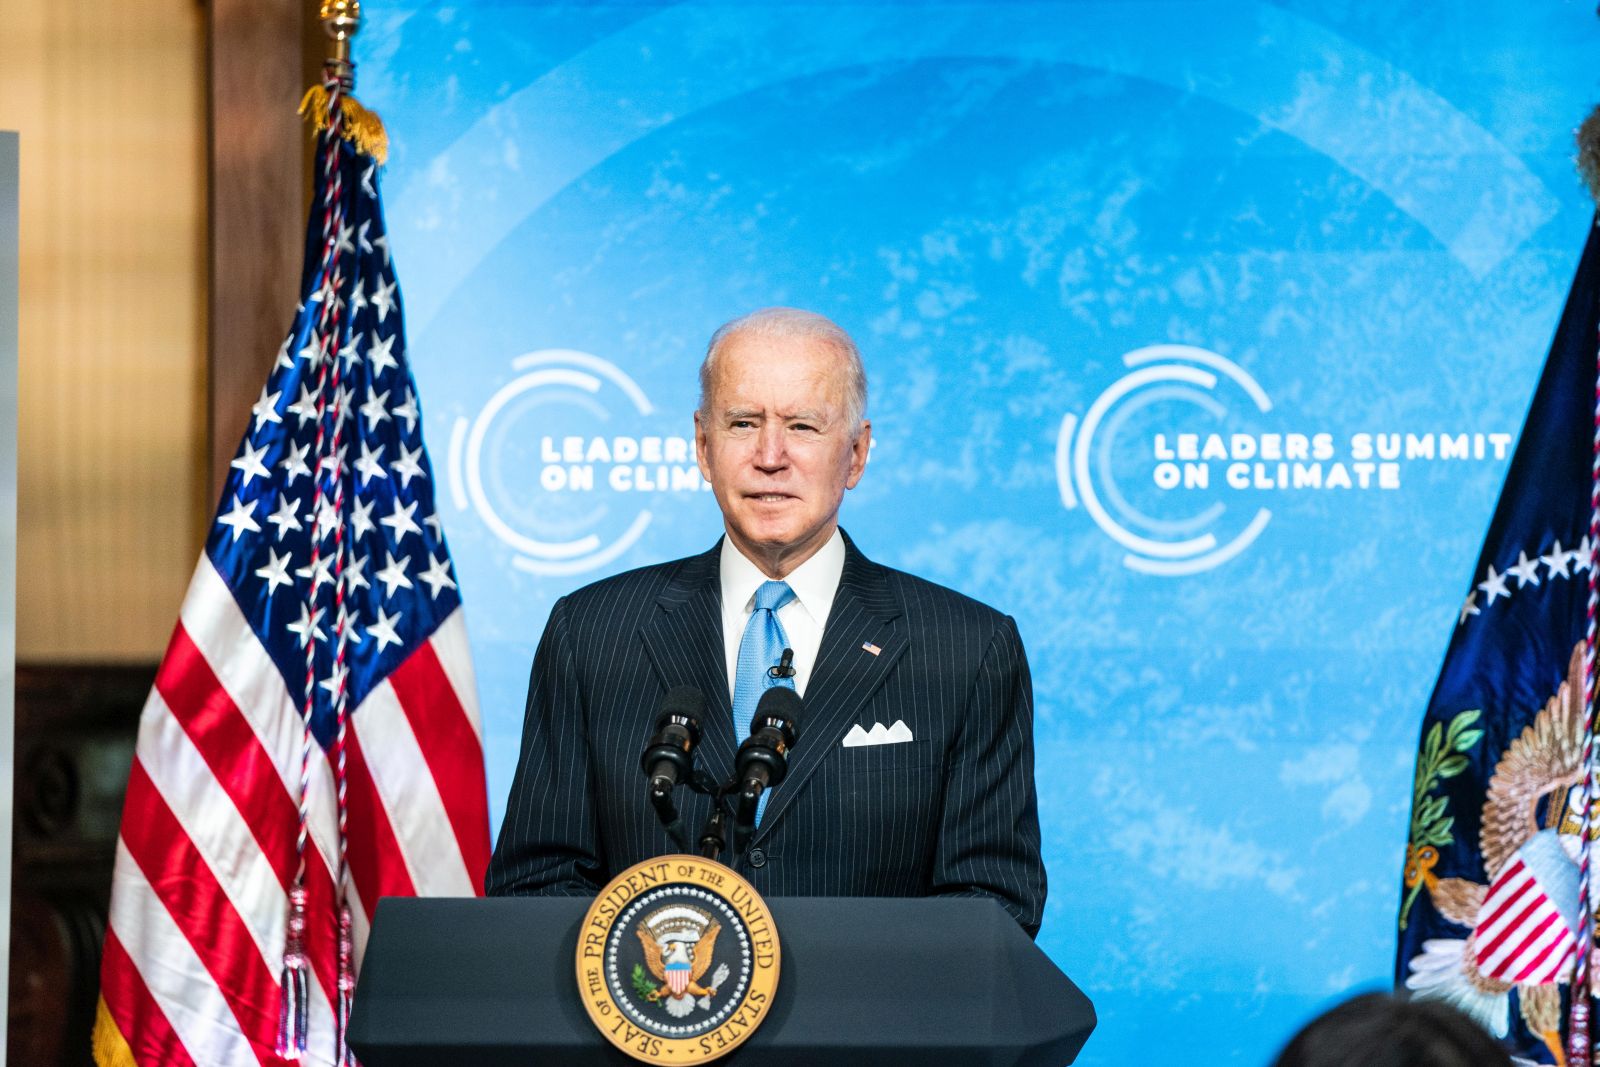 epa09155173 US President Joe Biden delivers remarks during the virtual Leaders Summit on Climate in the East Room of the White House in Washington, DC, USA, 23 April 2021. The meeting is intended to underline the urgency and economic benefits of stronger climate action on the road to the United Nations Climate Change Conference (COP26) in Glasgow in November 2021. Around 40 international leaders attend the summit.  EPA/ANNA MONEYMAKER / POOL